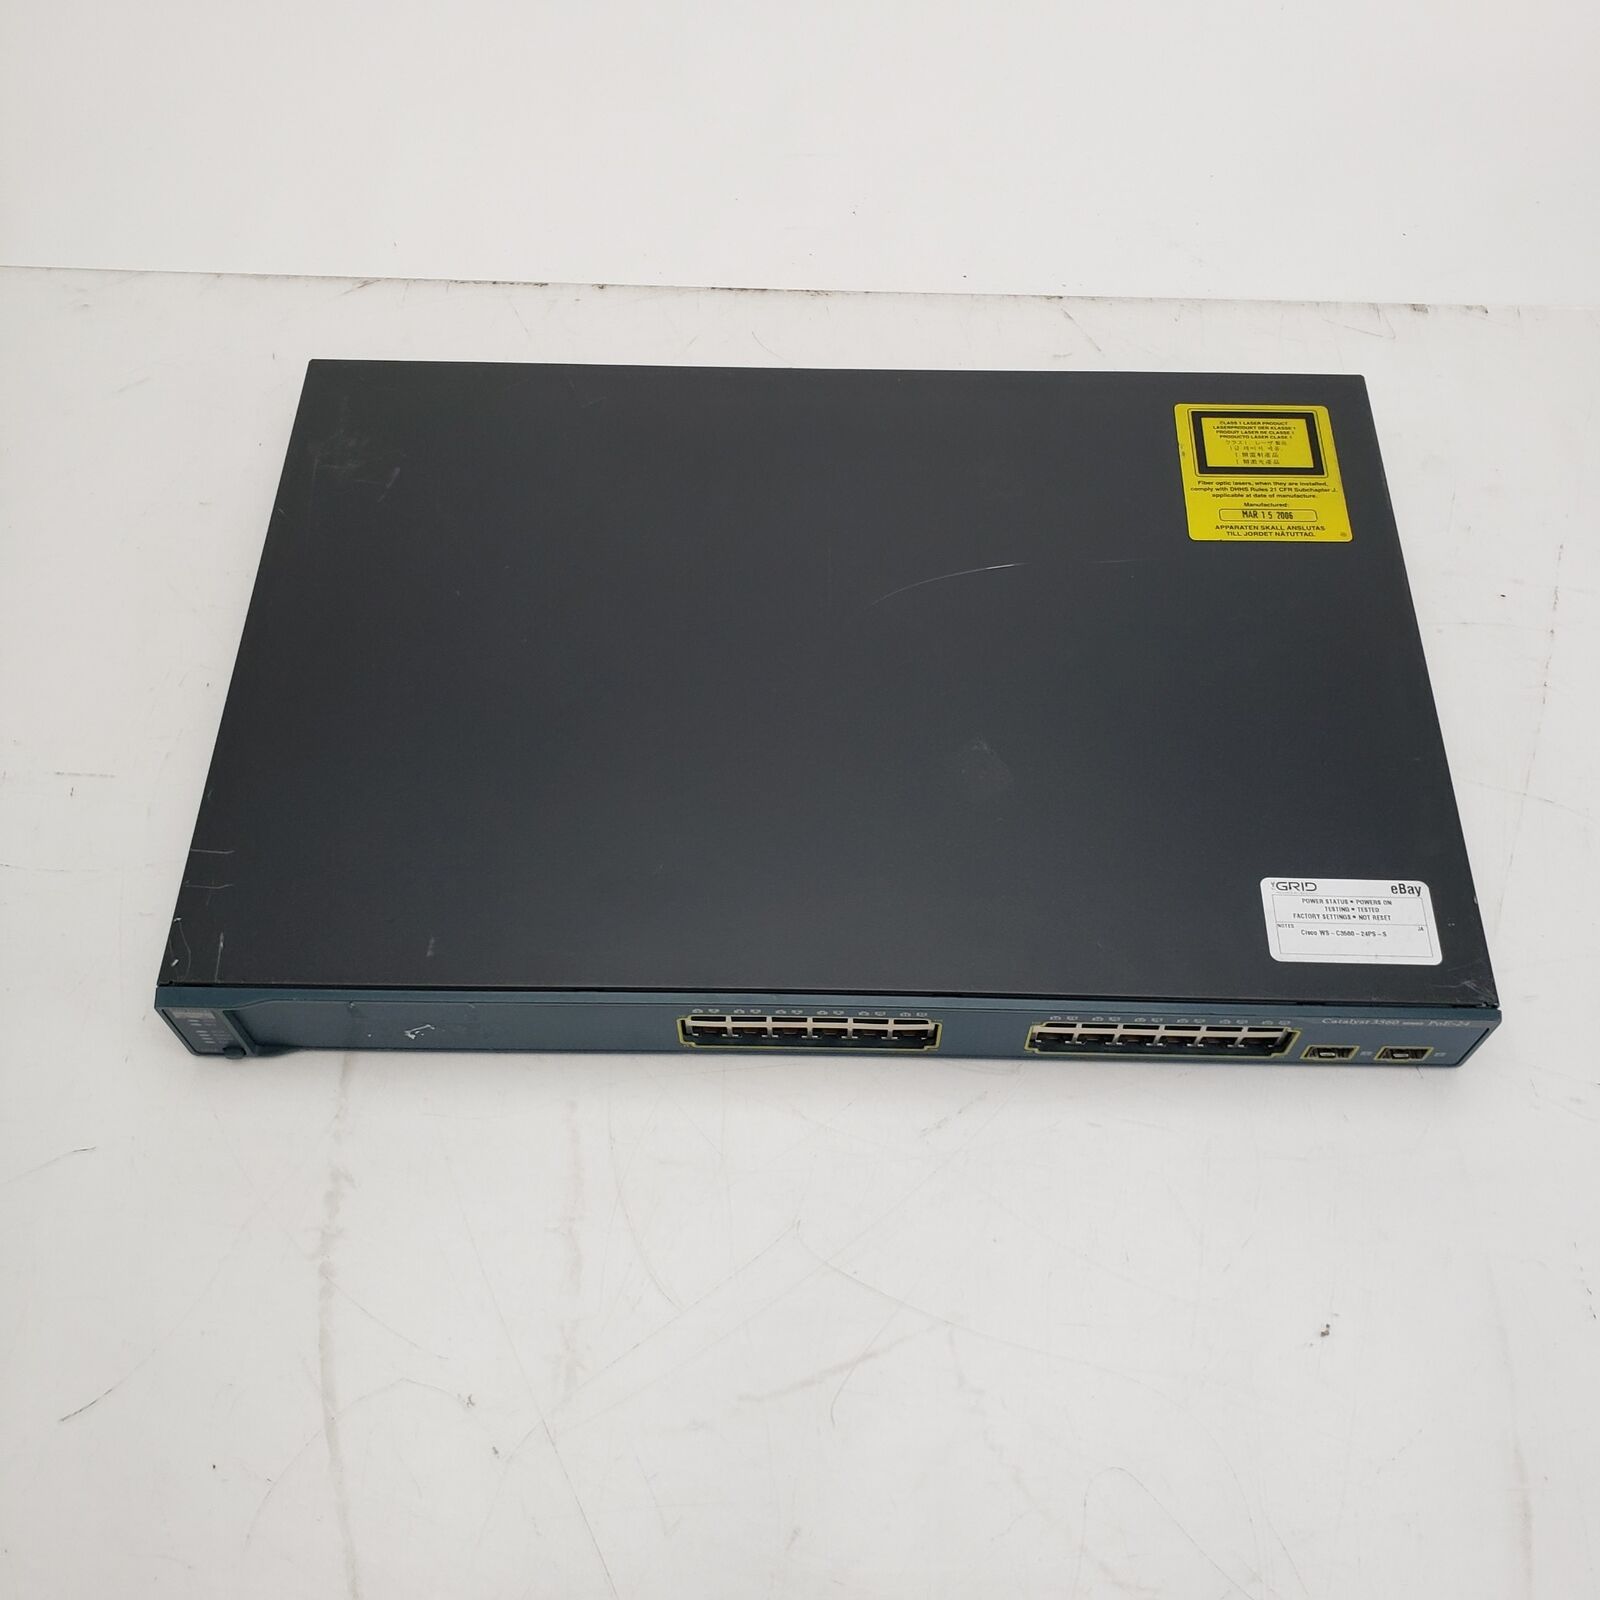 Cisco WS-C3560-24PS-S 24-Port Ethernet Switch - Tested